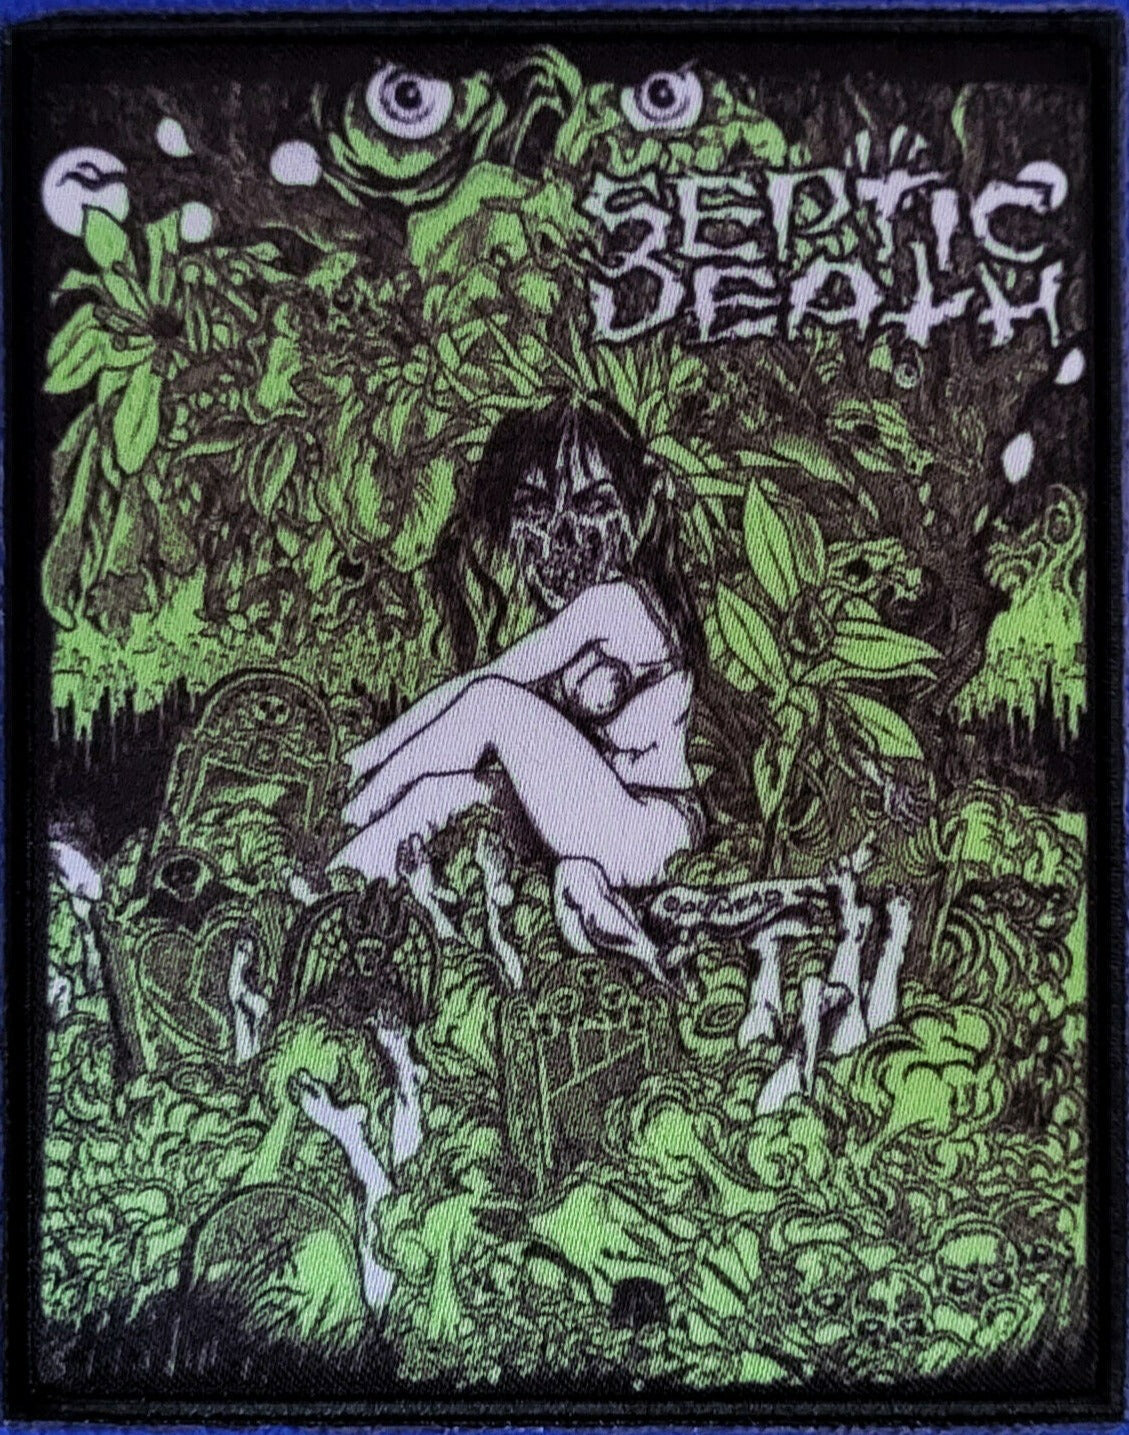 Septic Death - Need So Much Attention Patch – Punk Rock Shop